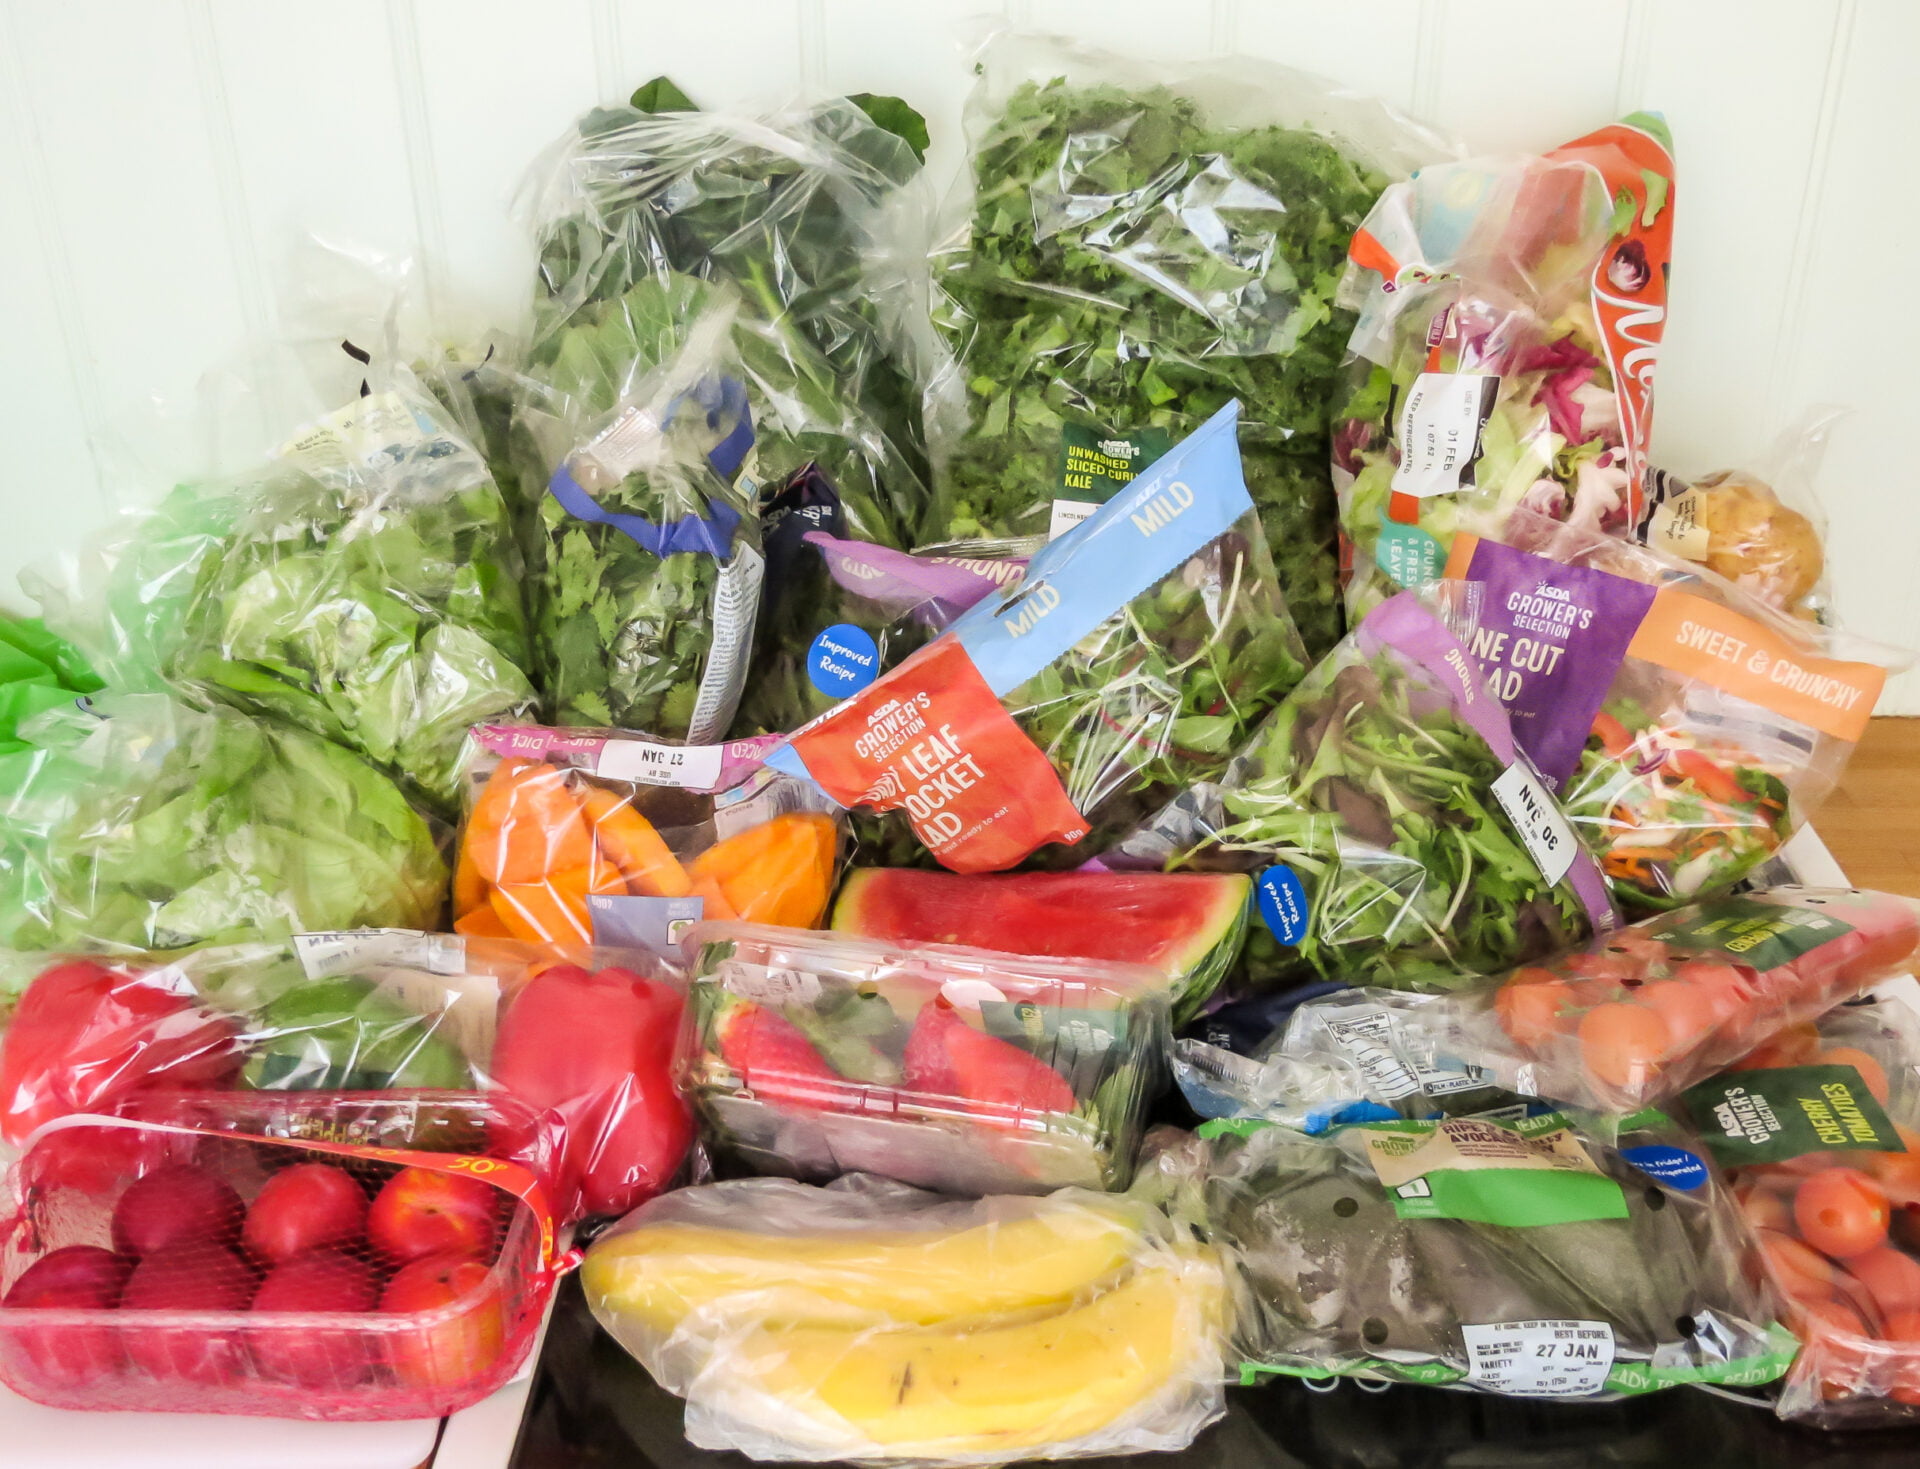 Collection of fresh fruit and vegetables grocery shopping from Asda supermarket.